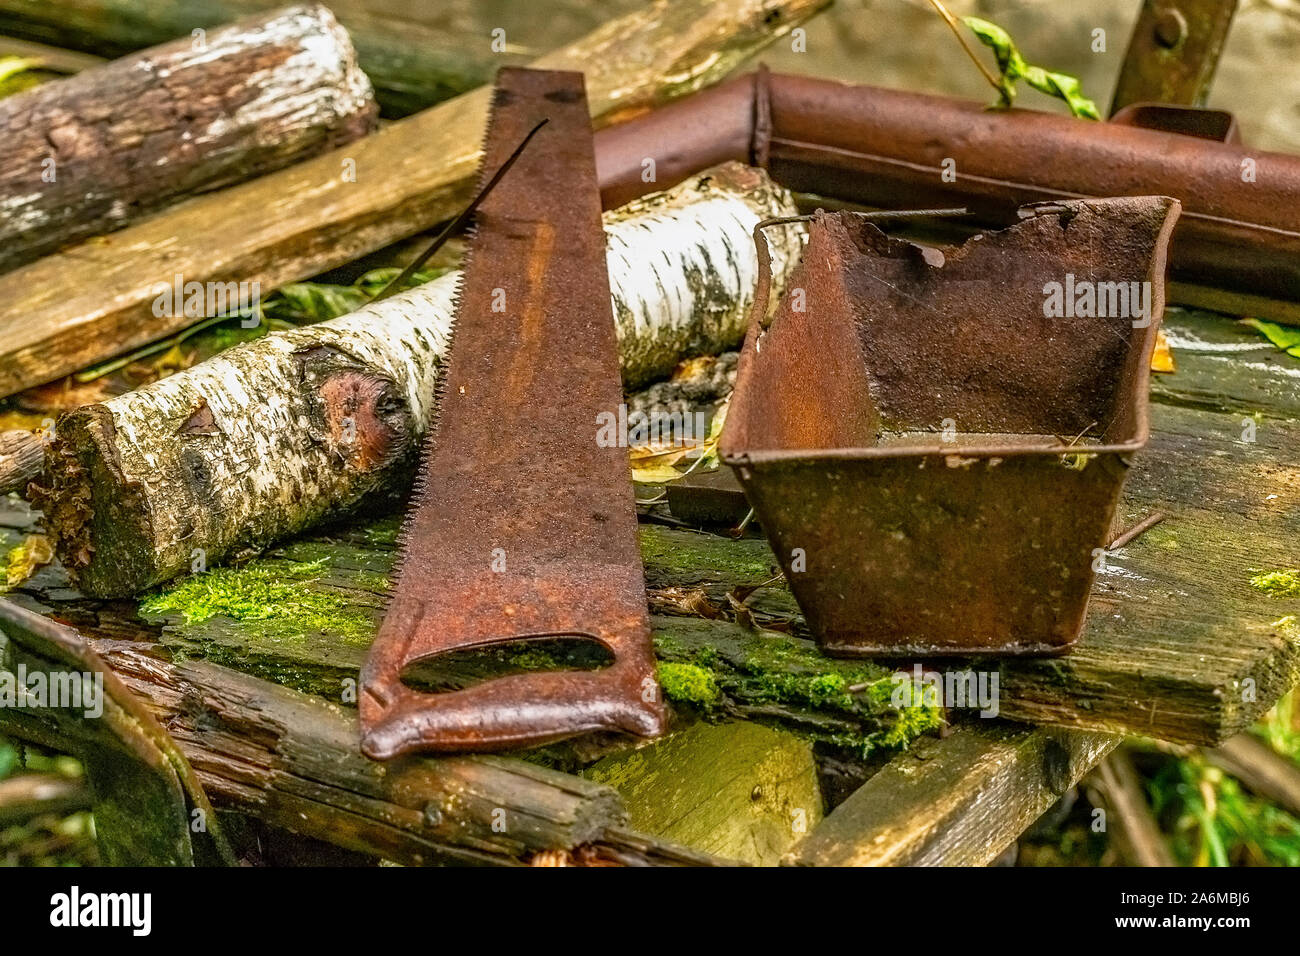 Old discarded things. Rusty hacksaw and bread baking dish. Stock Photo